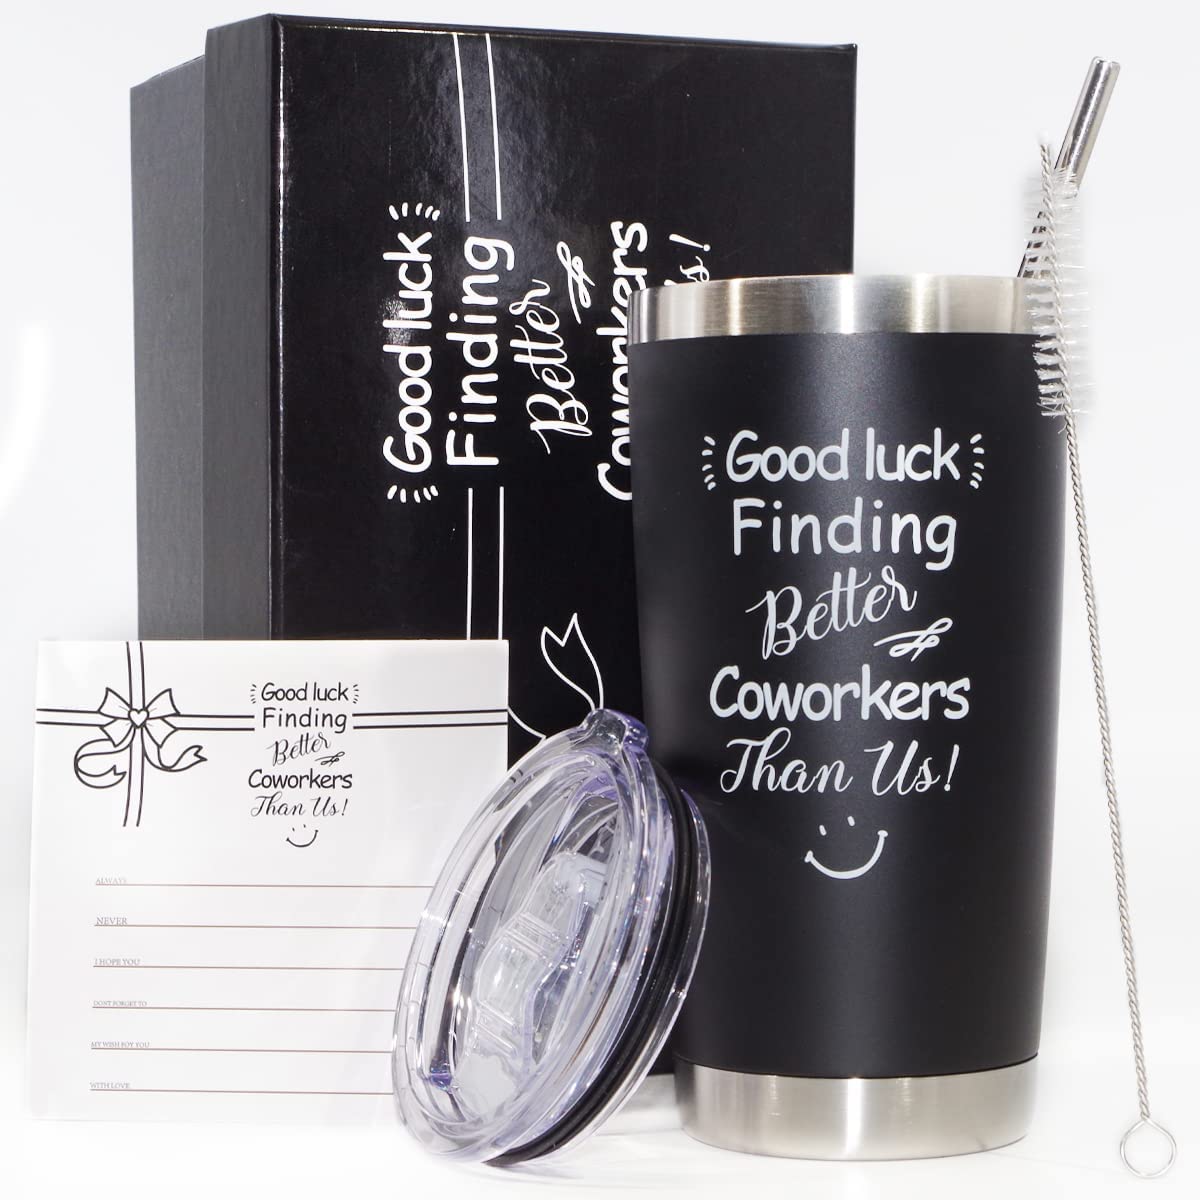 15 of the Best Cheap Teacher Gifts - Thrifty Frugal Mom